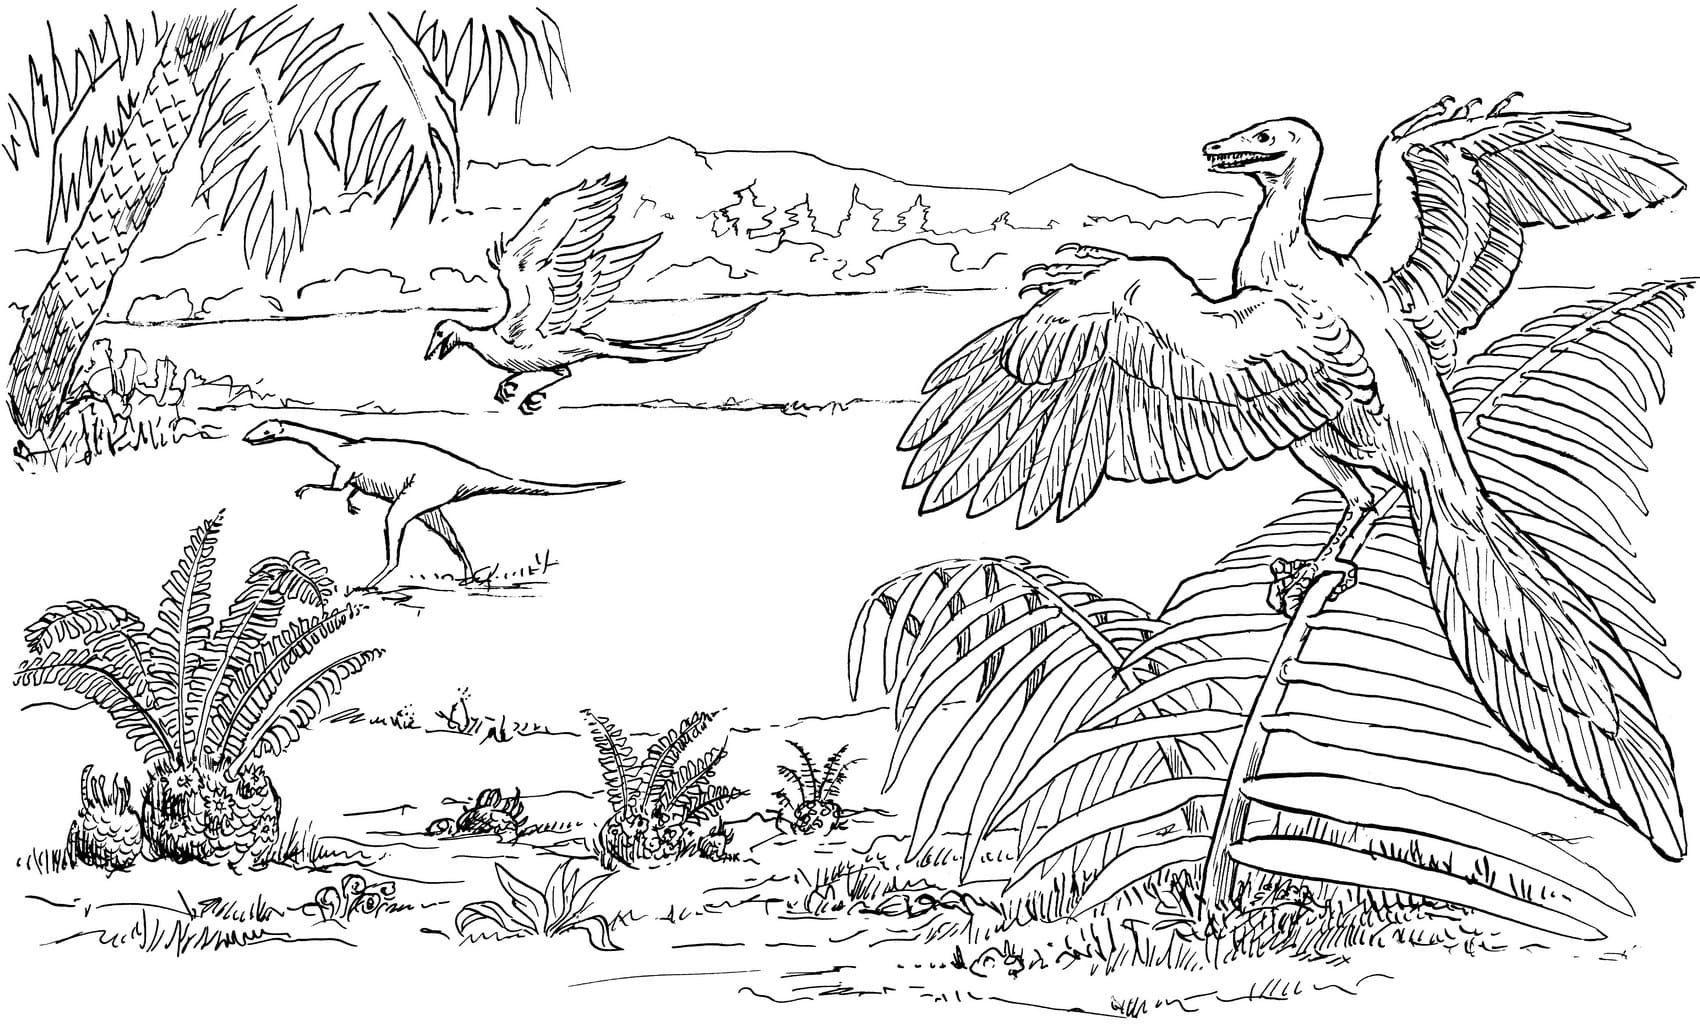 Jurassic World Coloring Pages. 20 Best Coloring Pages For Kids